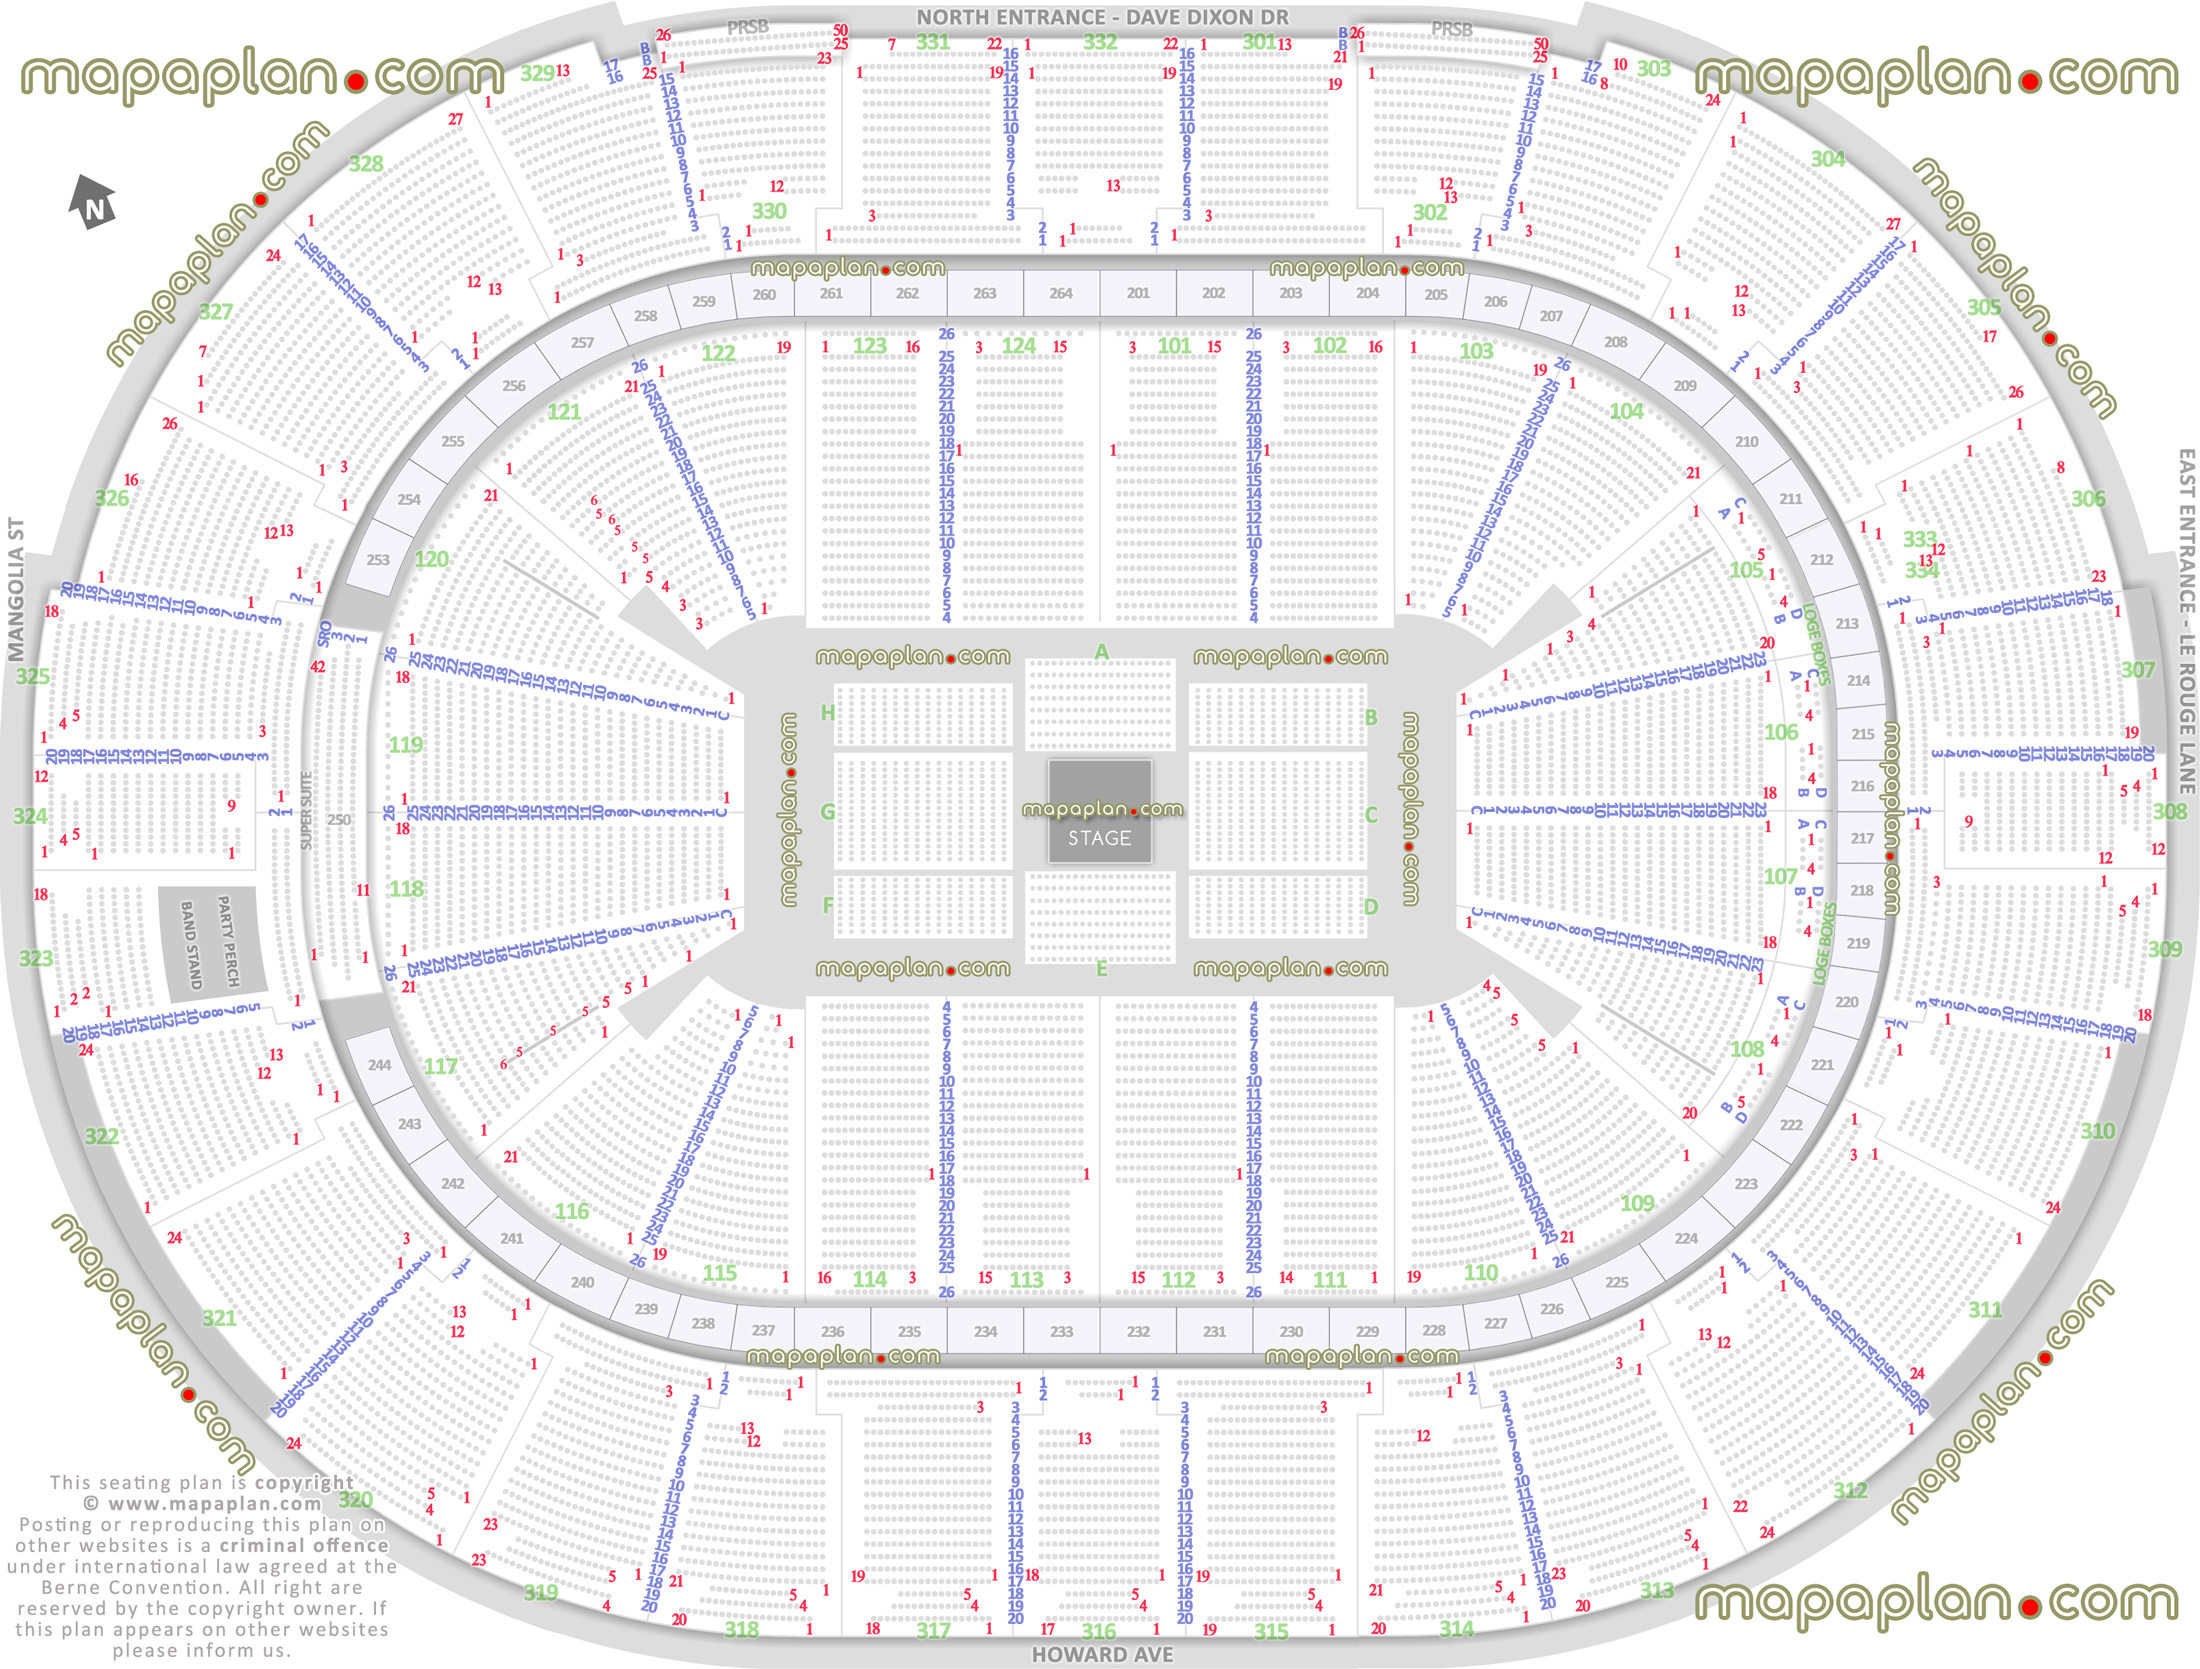 concert stage round printable virtual layout 360 degree arrangement interactive diagram seats row lower club upper level sections standing room only sro row section 250 wheelchair disabled handicap accessible seats plan premium executive loge boxes luxury hub international hub club super suite New Orleans Smoothie King Center arena seating chart